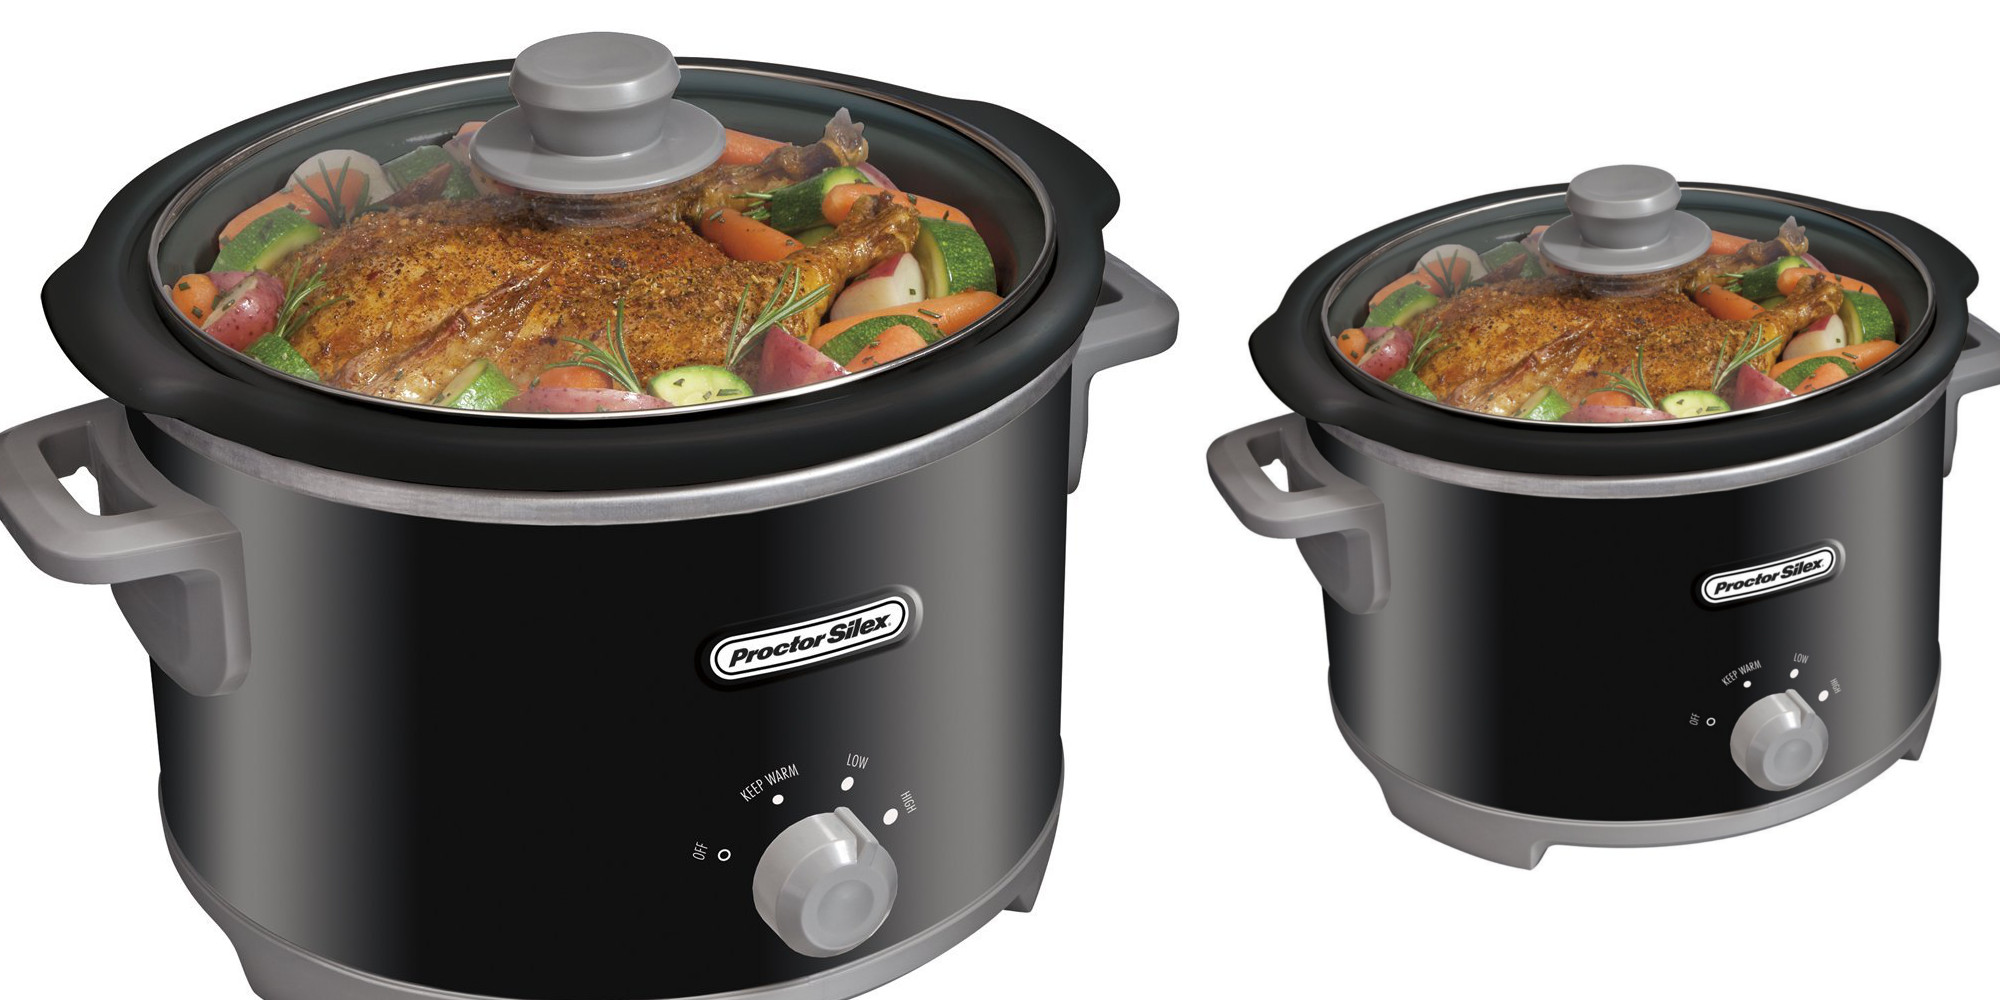 Get a brand new Proctor-Silex 4-Quart Slow Cooker from just $9 Prime